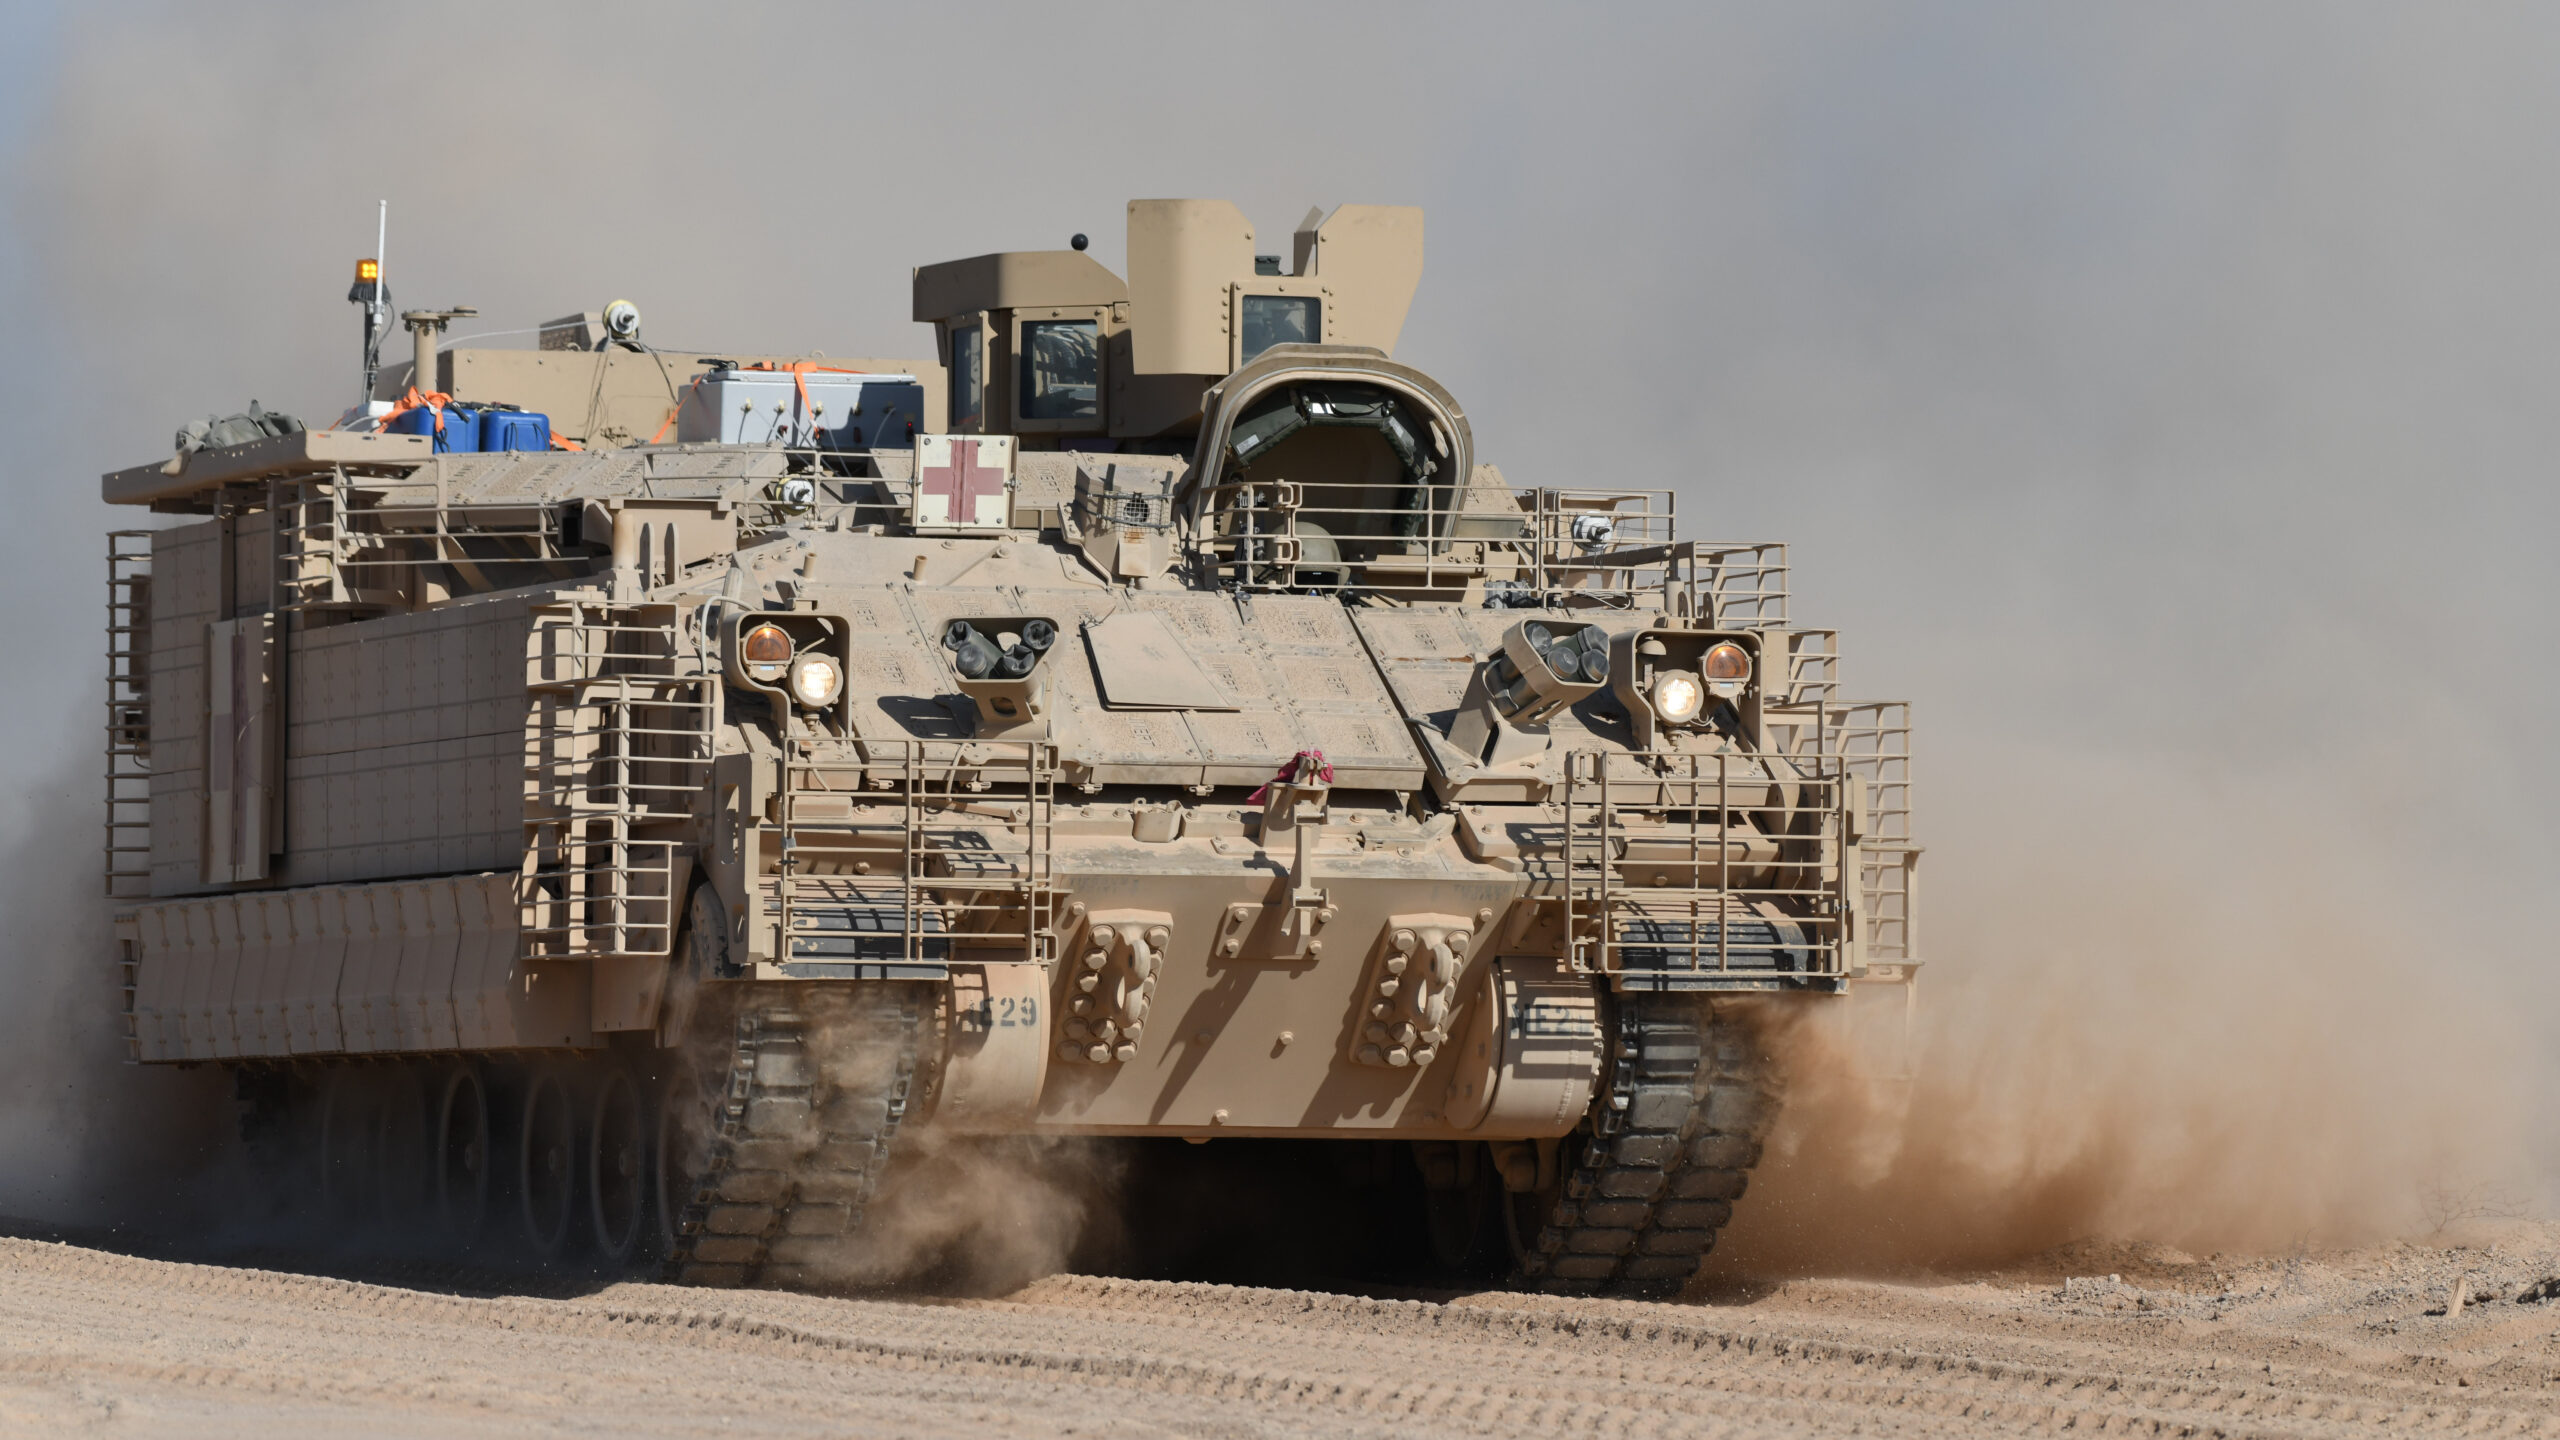 BAE Systems producing AMPV at full-rate production levels, eyes going faster